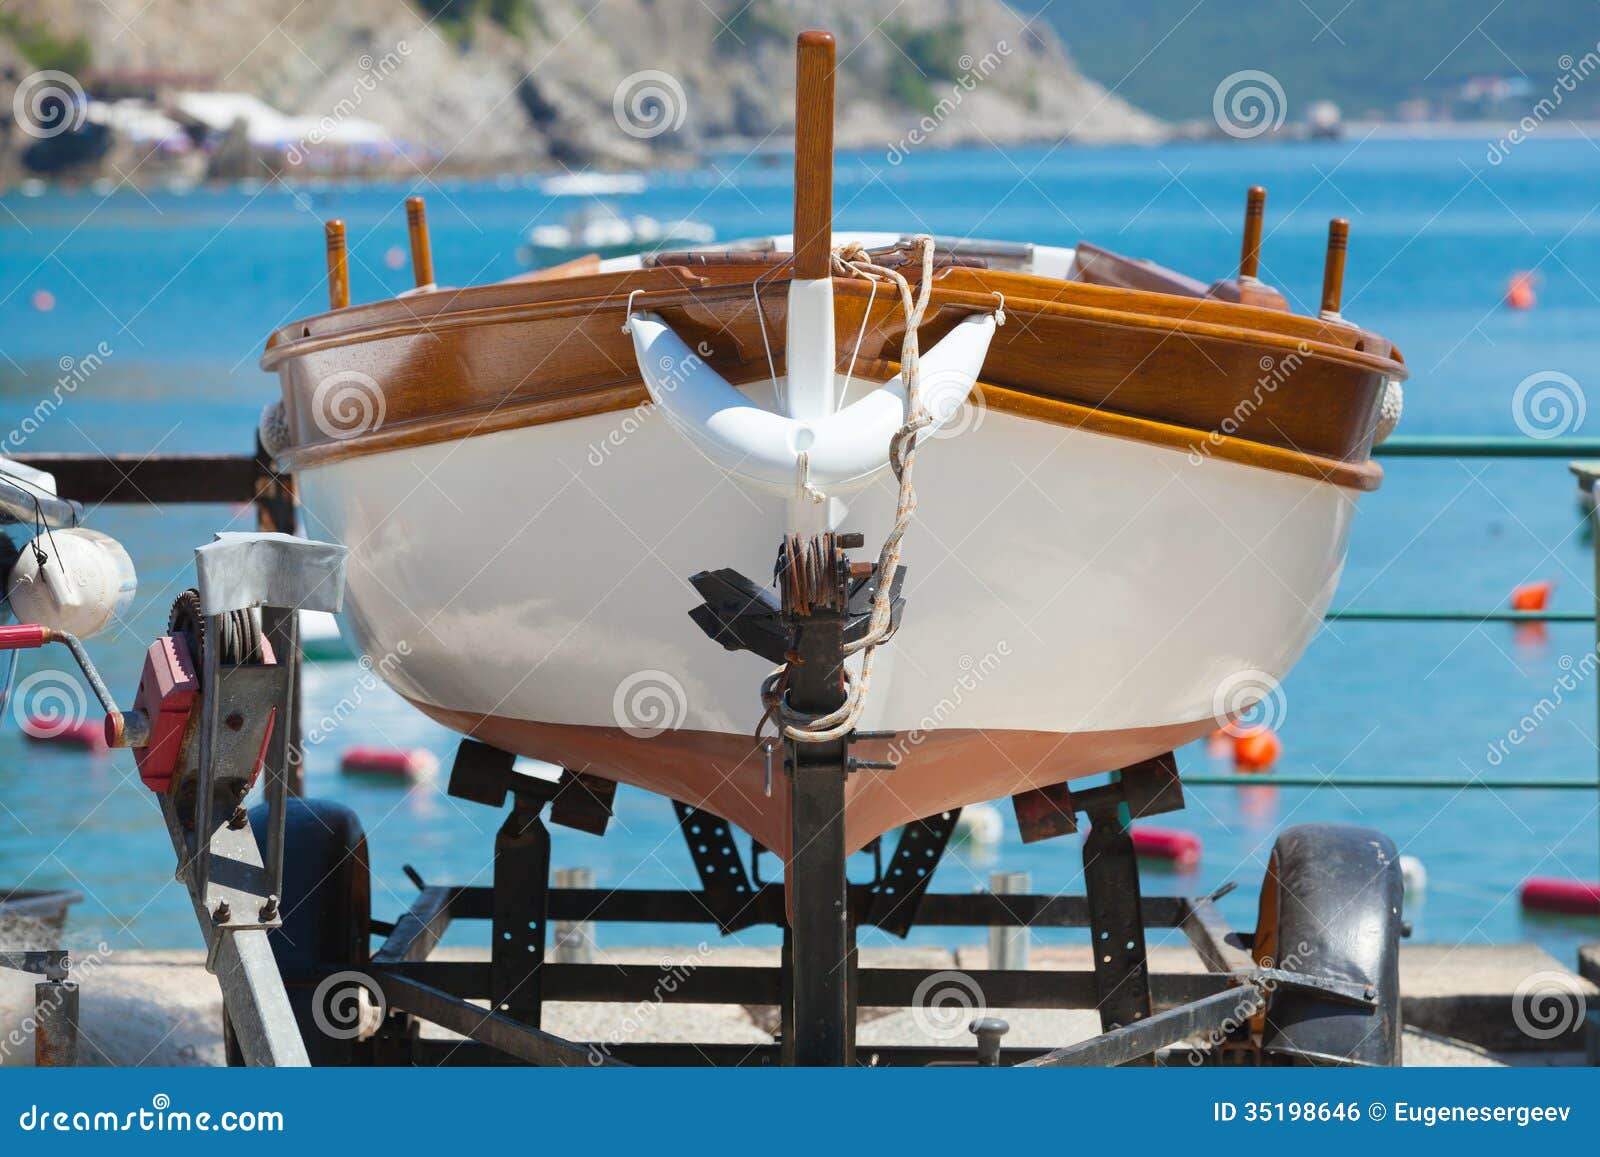 Wooden Fishing Boat Stands On The Coast Stock Photo ...